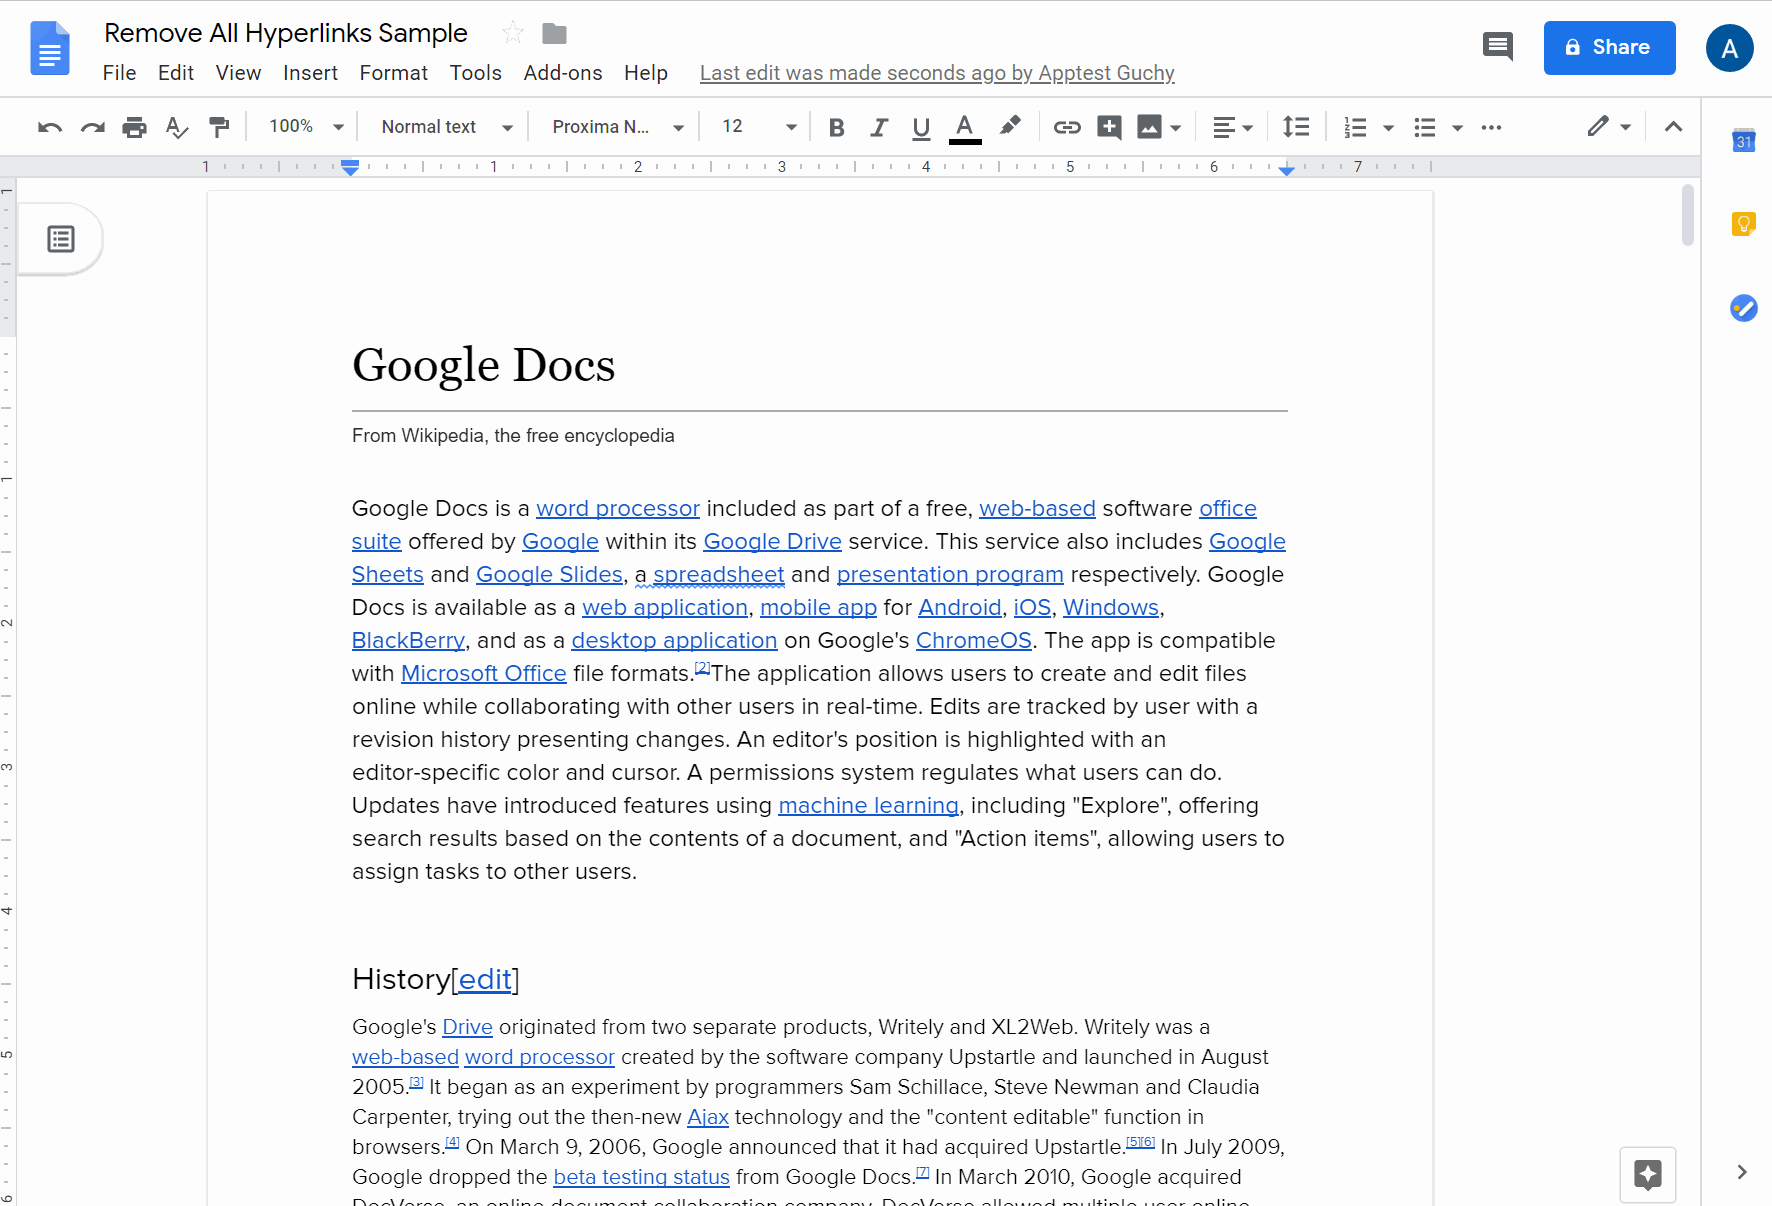 Remove all hyperlinks in Docs with the Apps script below